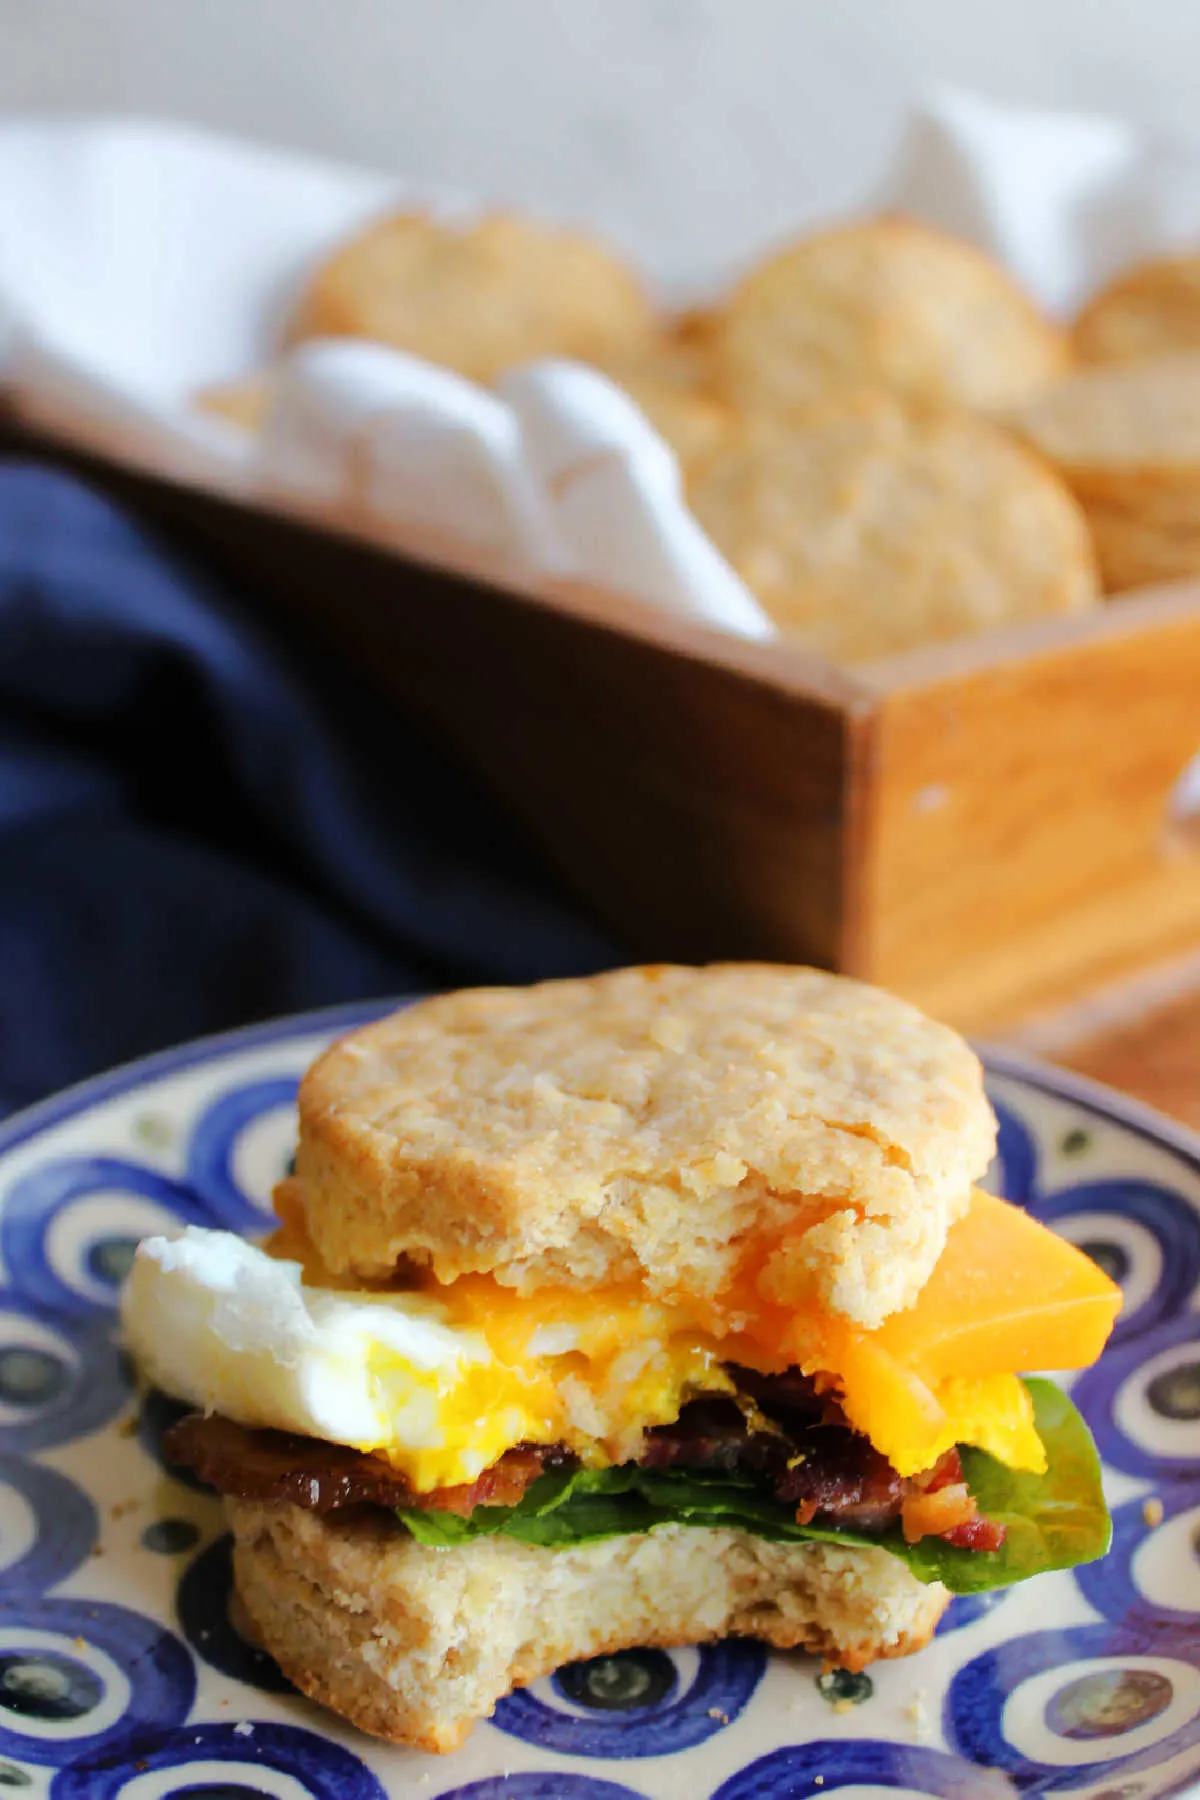 Biscuit made into a breakfast sandwich with eggs, cheddar, bacon and spinach.